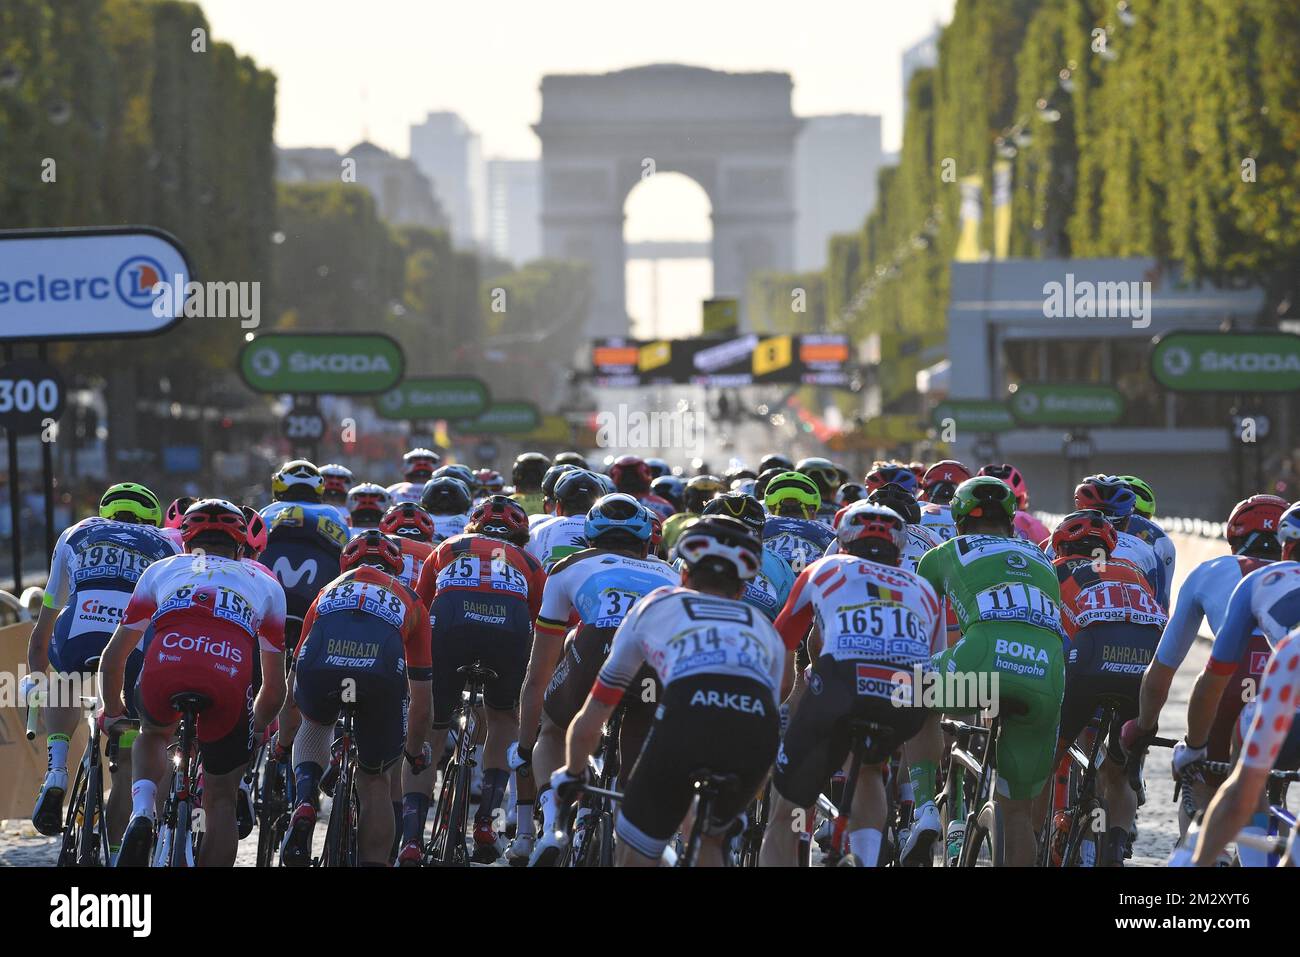 Illustration shows the pack of cyclists at the final stage of the 106th edition of the Tour de France cycling race, from Rambouillet to Paris Champs-Elysees (128km), France, Sunday 28 July 2019. This year's Tour de France starts in Brussels and takes place from July 6th to July 28th. BELGA PHOTO DAVID STOCKMAN  Stock Photo